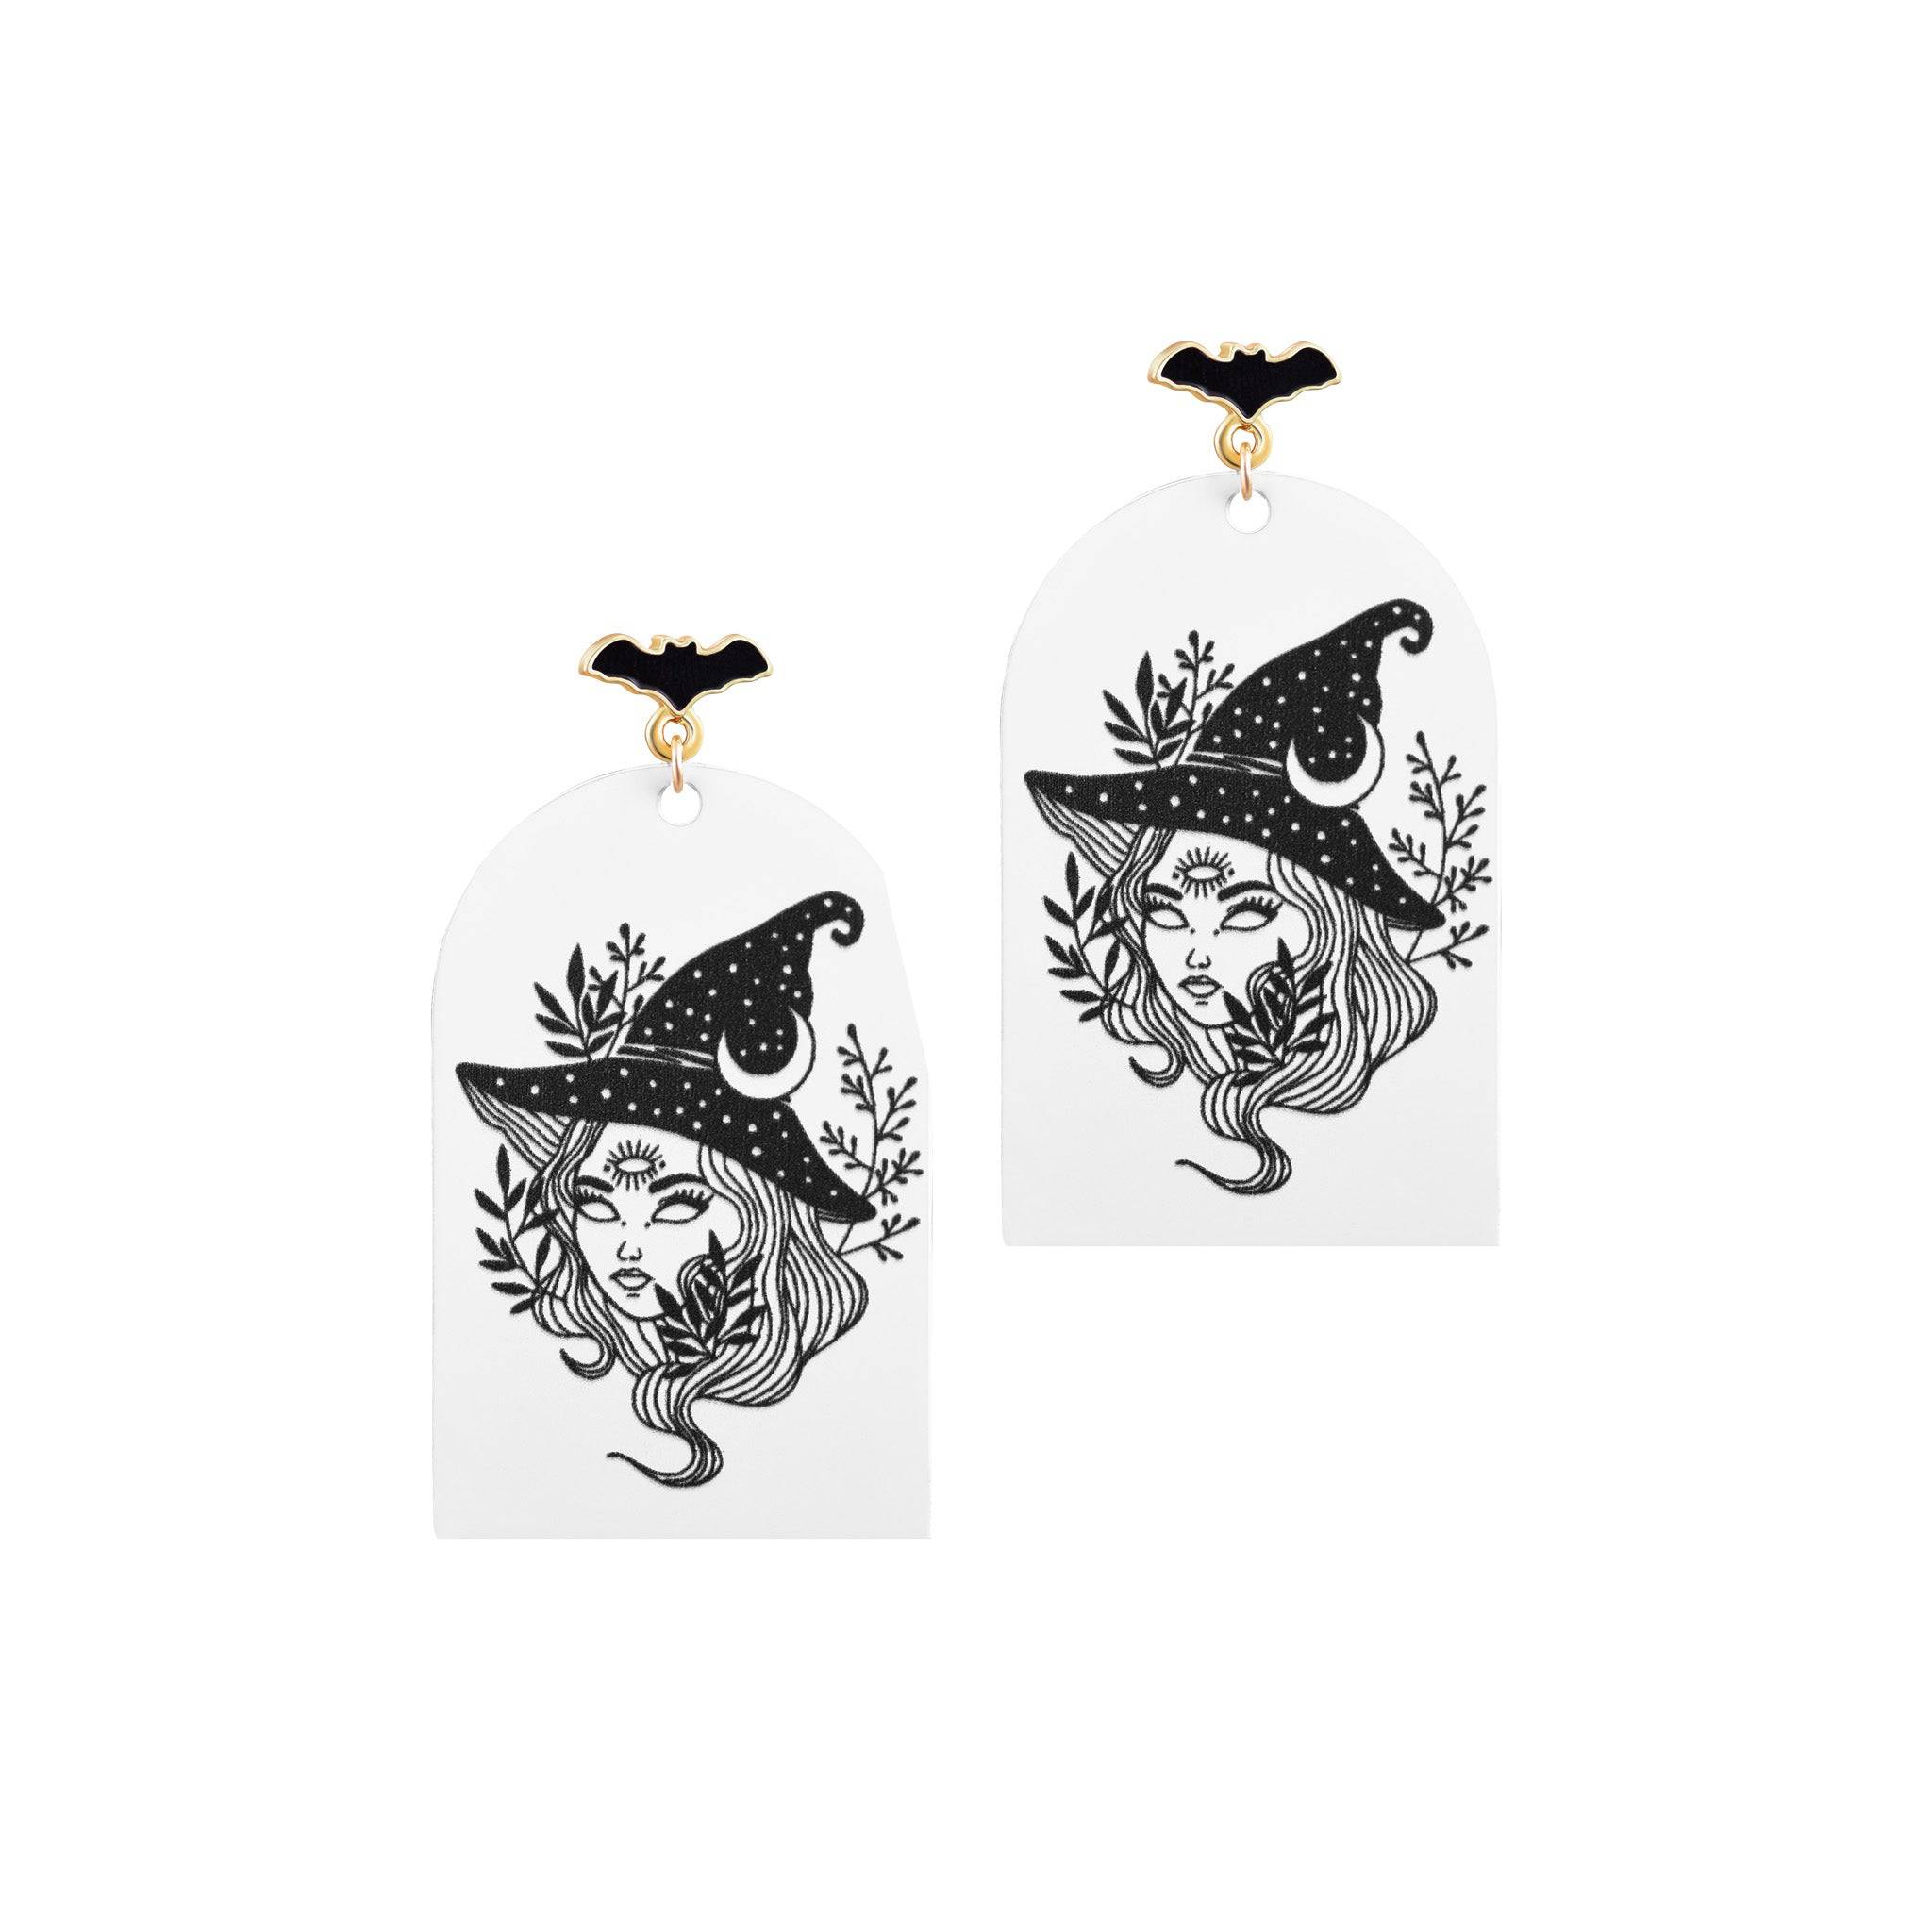 Painted Witch Stud Earrings - Black and White - The Gilded Witch